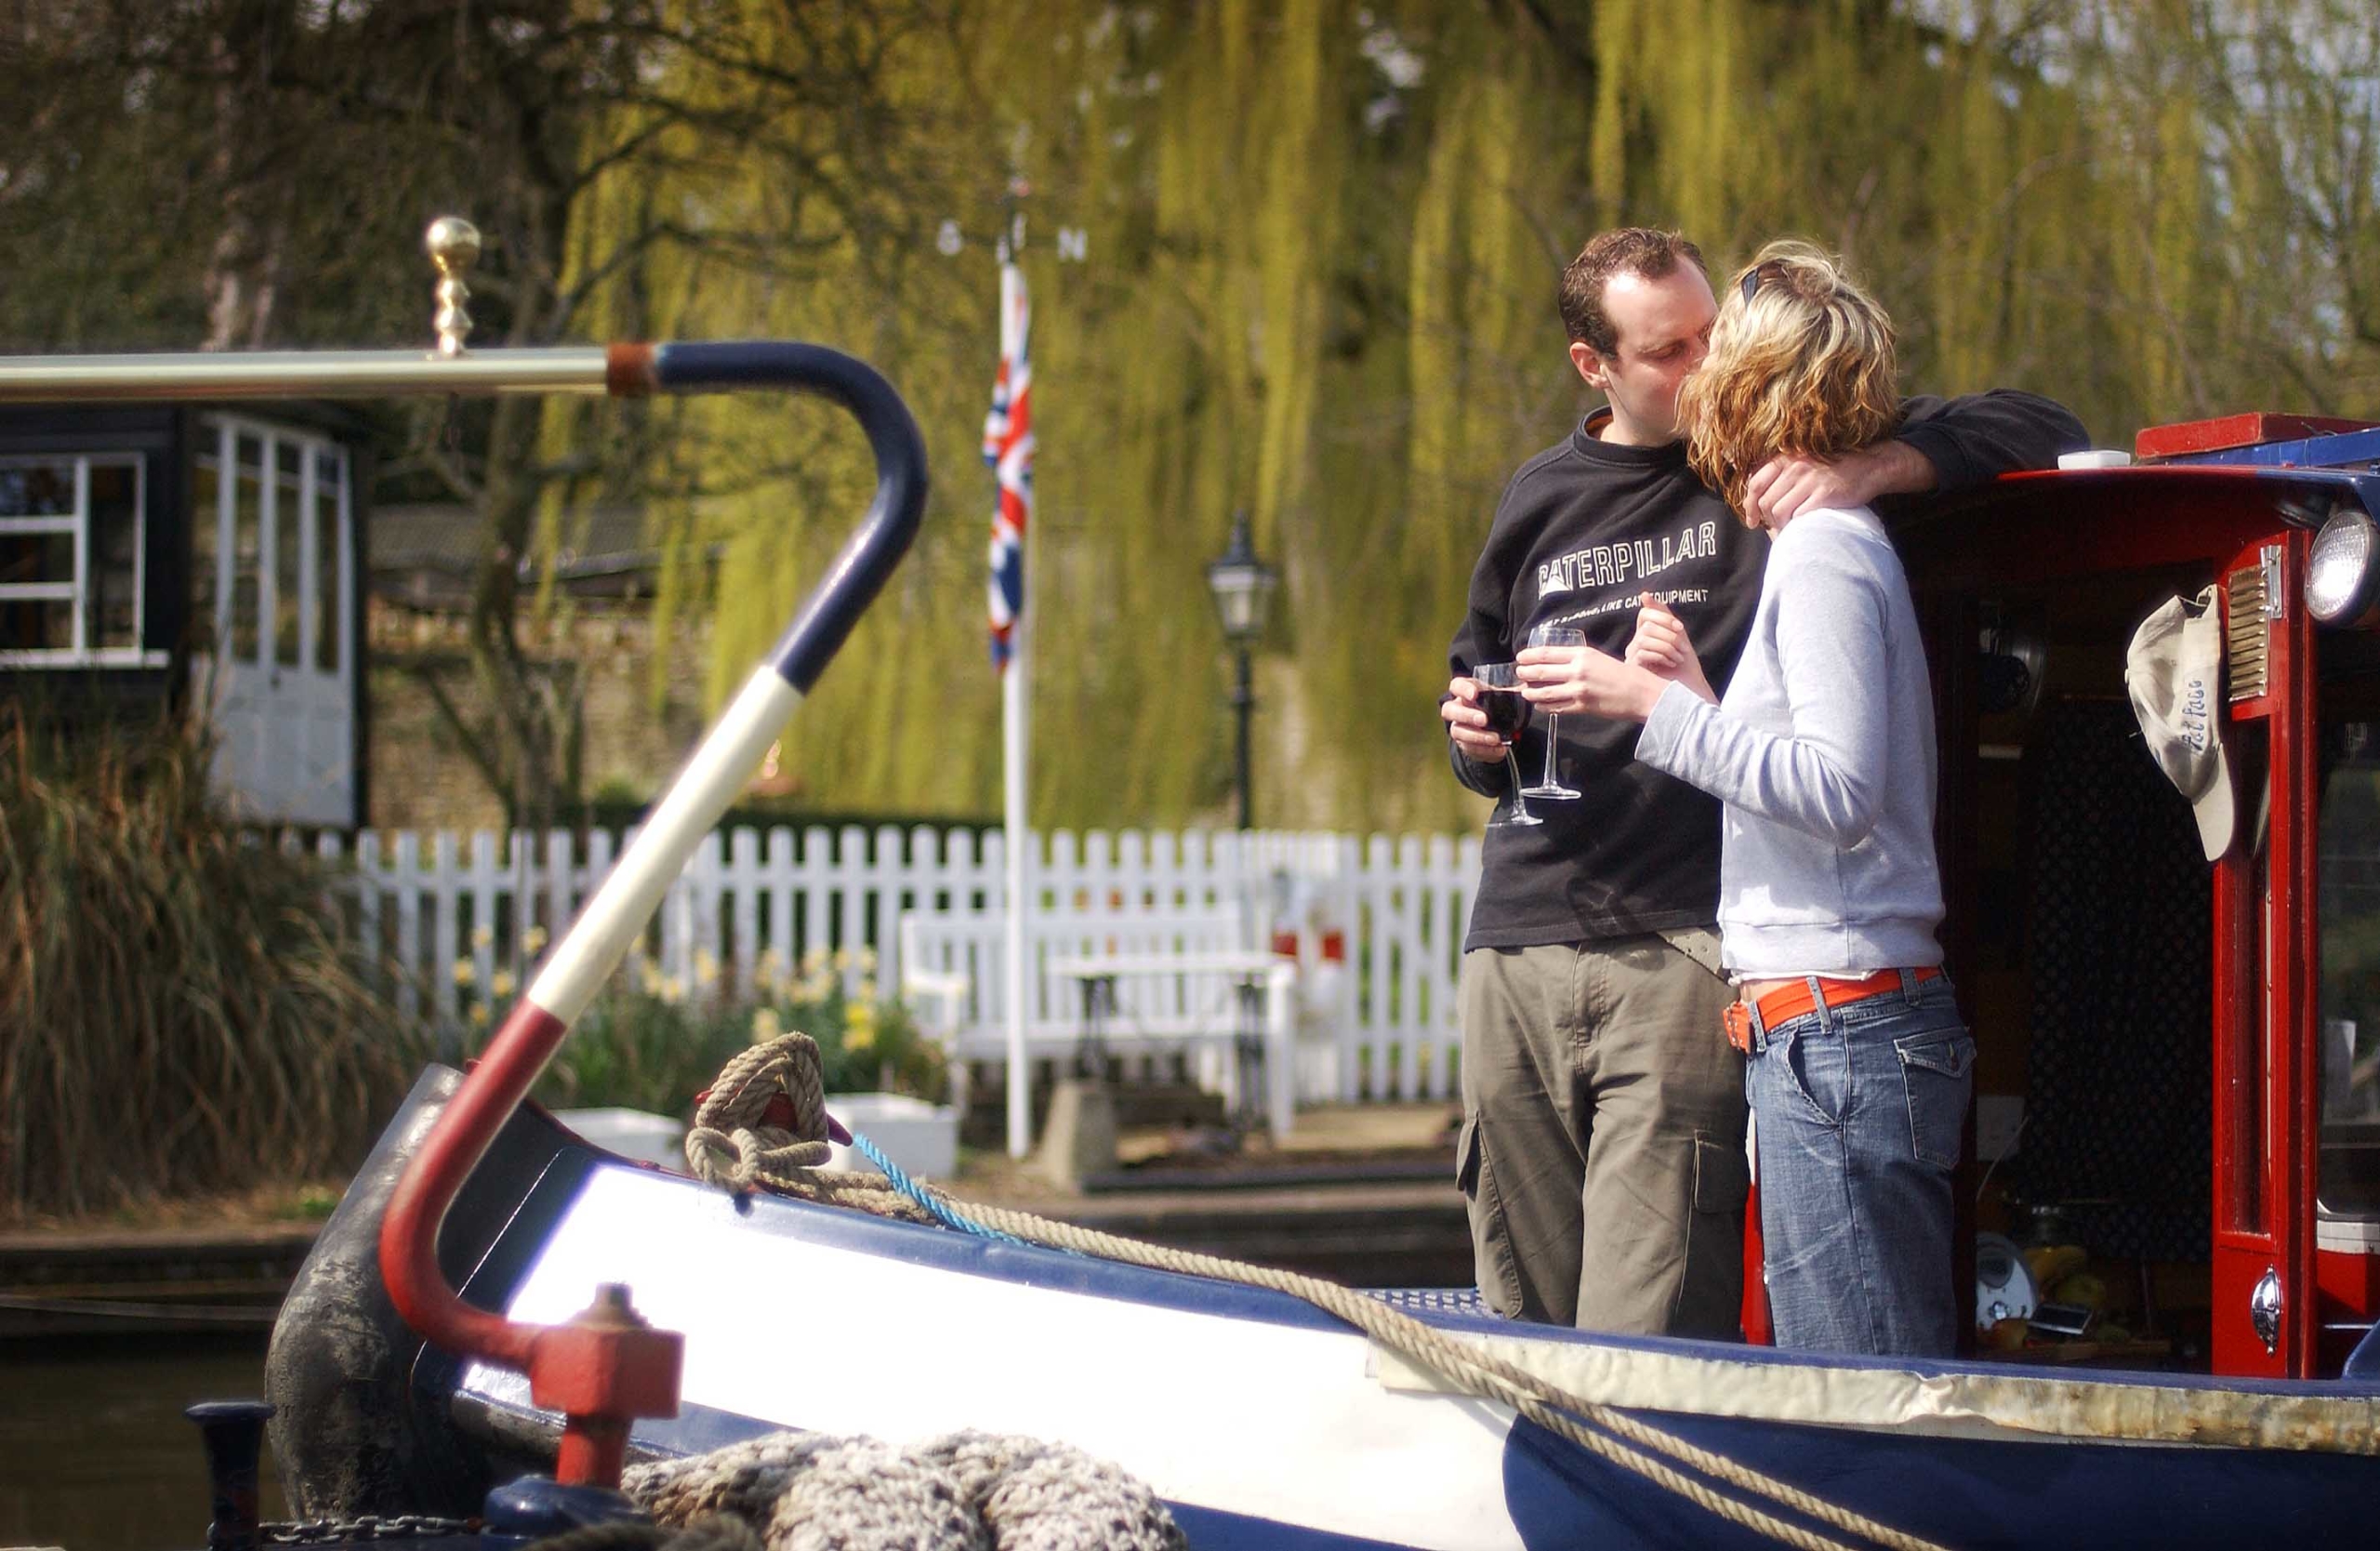 Take a romantic canal boat holiday for two this Valentine’s